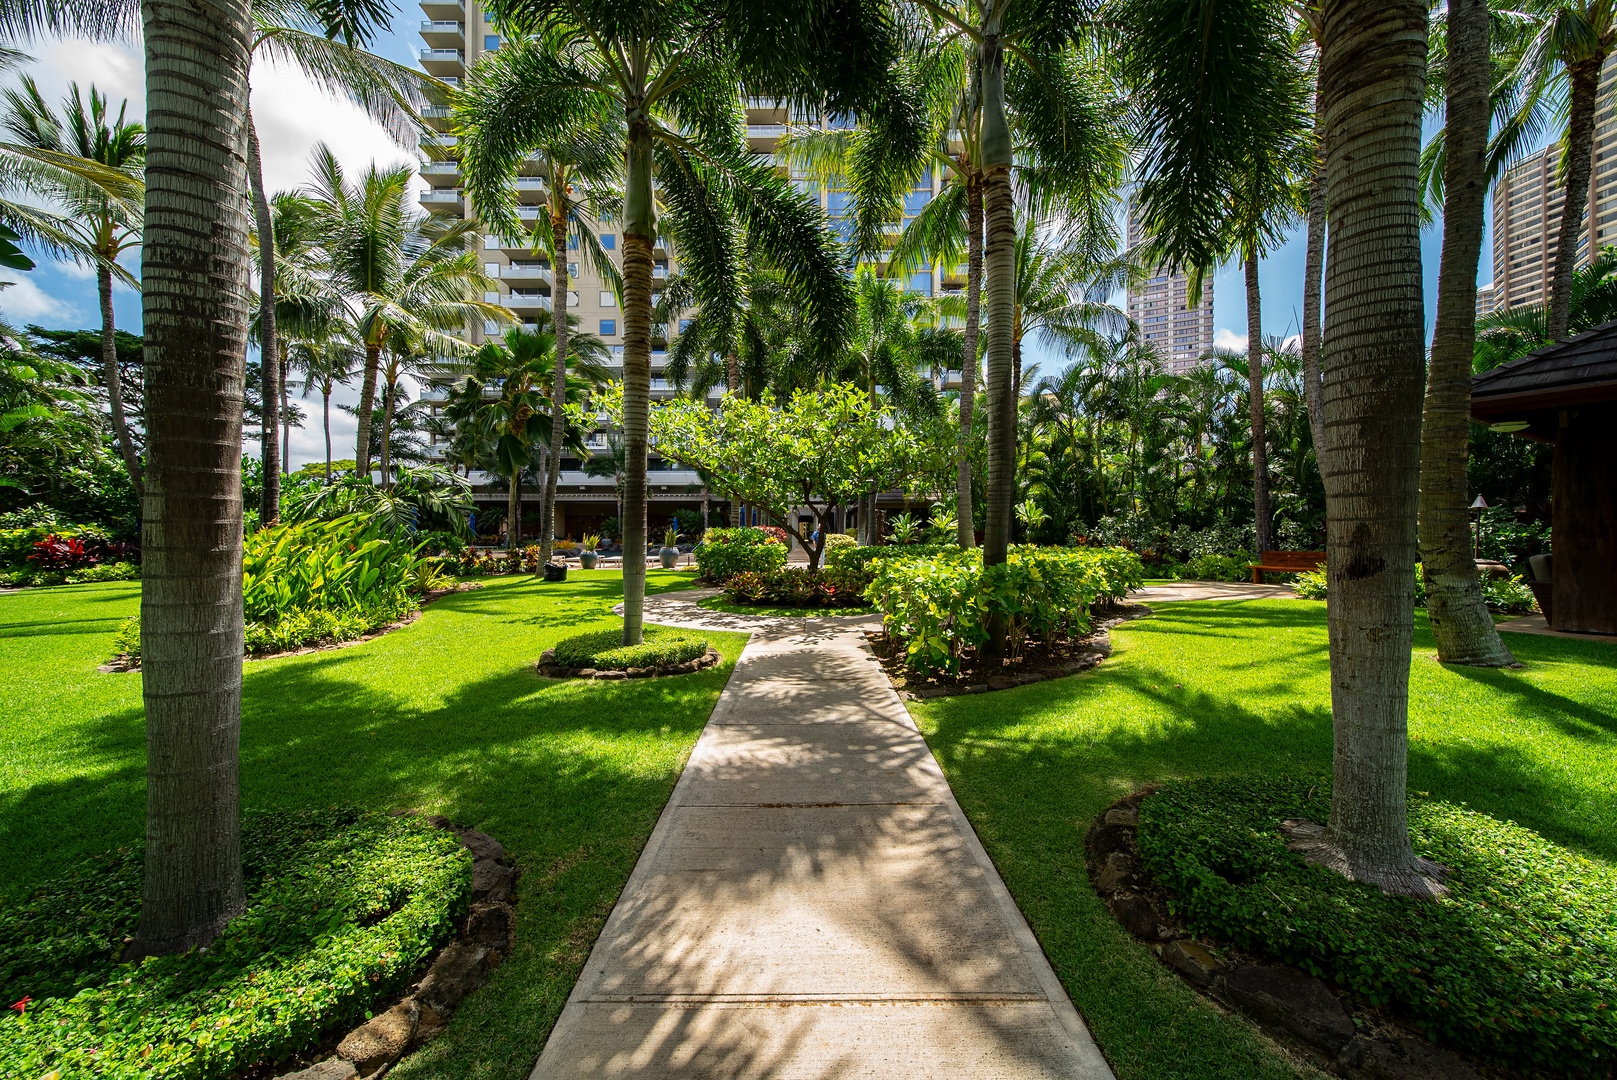 Honolulu Vacation Rentals, Watermark Waikiki Unit 901 - Morning walks or afternoon jogs, the community area is a perfect spot.